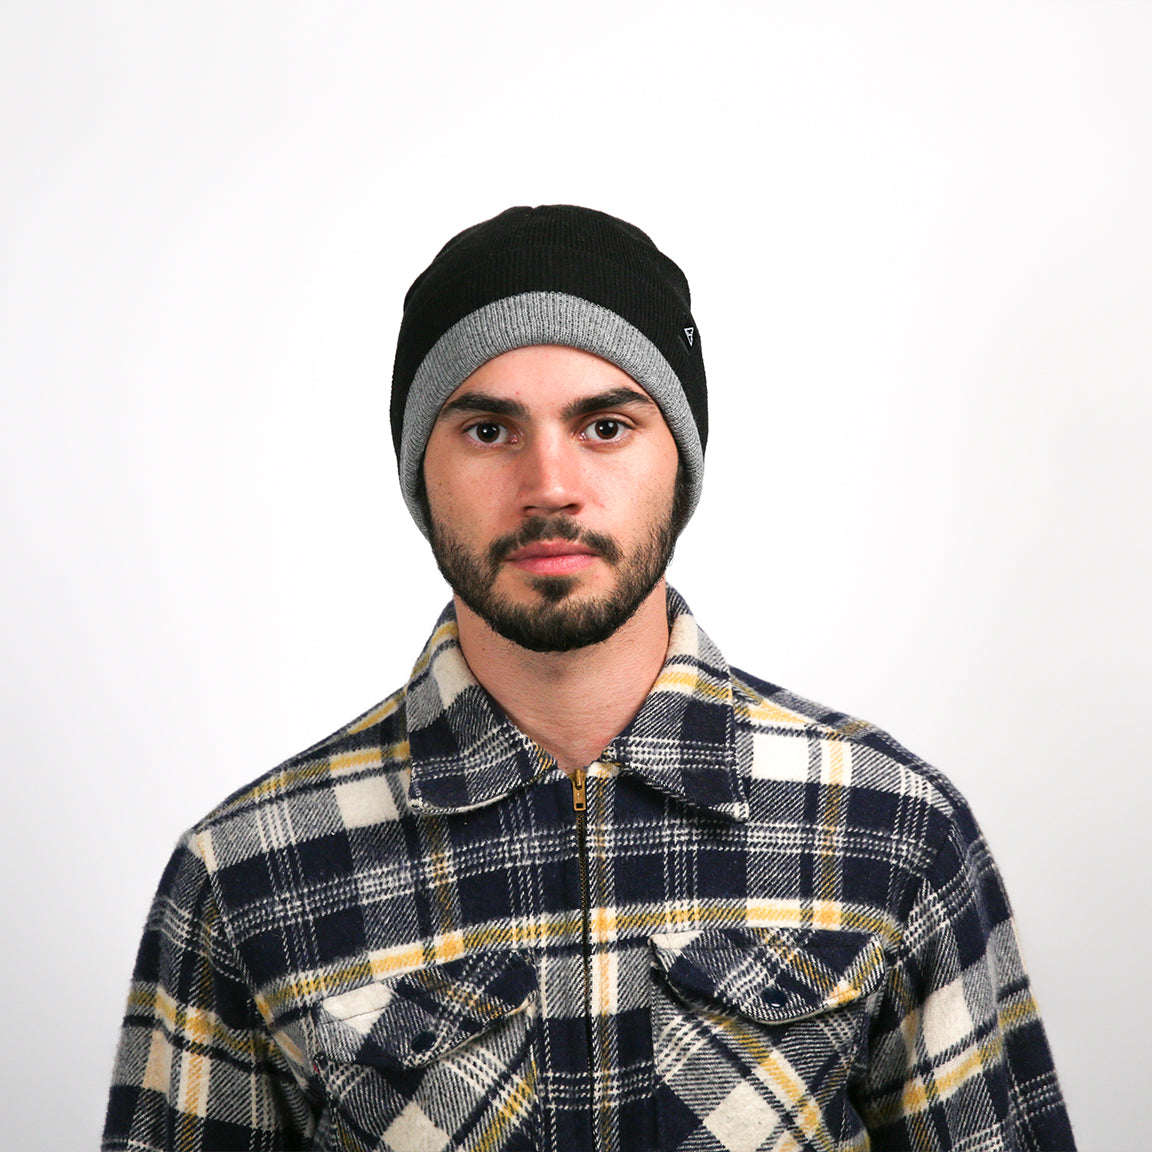 A man with a medium complexion and a focused gaze is facing the camera. The beanie he wears is black with a wide, heather grey band at the bottom. His flannel shirt is a combination of navy blue, white, and a bright mustard yellow in a plaid pattern. The shirt's material appears thick and warm.